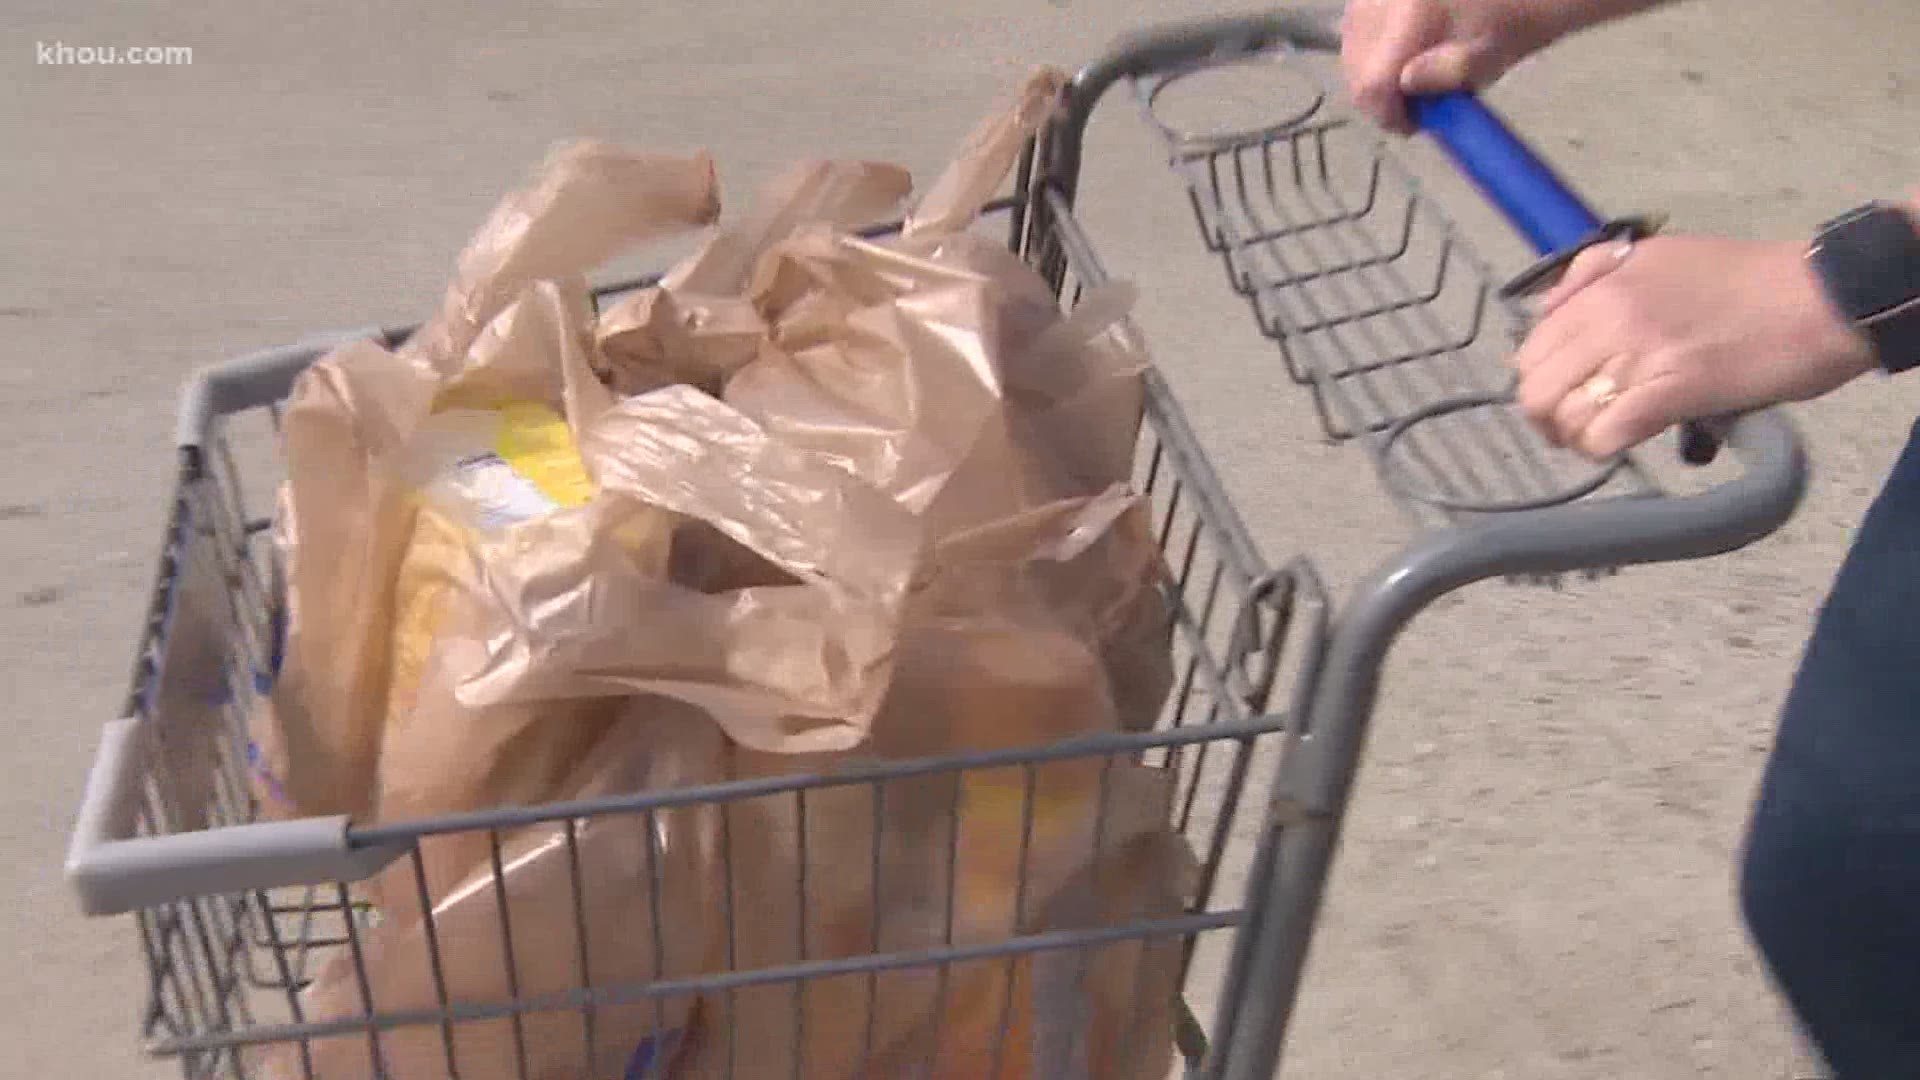 Supermarkets are taking extra precautions during the Thanksgiving rush this year, and customers are doing the same.